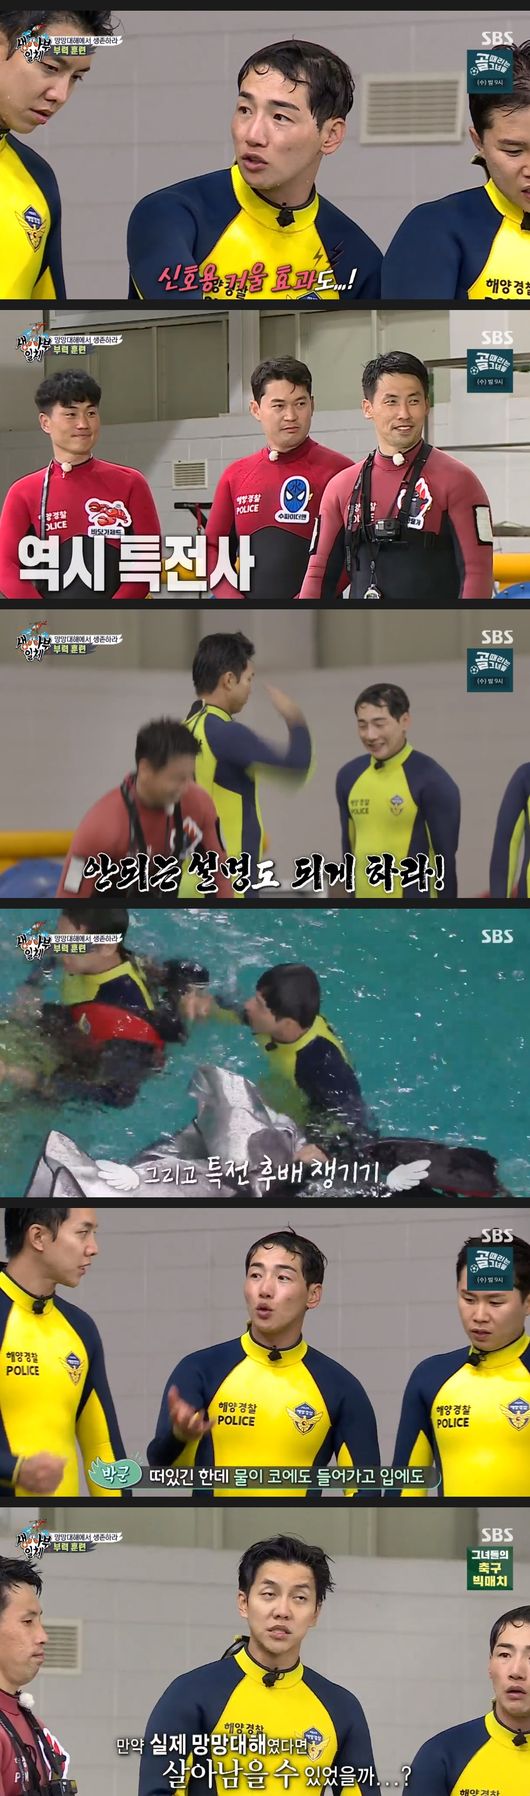 Lee Seung-gi and Park Guns Special Warrior Chemie burst properly in All The ButlersThe masters of the Korea Coast Guards were also admitted.A vacation special was drawn on SBS entertainment All The Butlers broadcast on the 27th, and Park Gun appeared.When Park Gun from Special Warrior appeared, Lee Seung-gi said, I should call him a officer.Lee Seung-gi was a soldier and a supervisor, he said politely to the army. Park Gun also introduced himself as Lee Seung-gi, a soldier in the military class, and Trot Special Warrior Park Gun, who worked with Lee Seung-gi and Special Warrior. Park Gun said, I am a lot younger in the entertainment industry, but I will call it Lee Seung-gi, who is 16 years old as I came to society. Lee Seung-gi said, Why do you wear a special Warrior suit when you come outside?Lee Seung-gi said, When I came out of TV, I was loved by the whole nation. I did not know my debut at that time. I met on the stage of the unit so much before my debut, I just said. The two saluted the slogan Consolidation saying Special Warrior is an eternal special warrior.Yang Se-hyeong and Kim Dong-Hyun asked, After the victory is over, I still have to drink about the army. Park Gun said, It was a good example, elite, full of physical strength and personality in the training camp.At the battle power contest, 1,000 people marathoned 10 times together, 90th out of 1,000 people, 90th out of 1,000 people, 100 friends, top 10 professionals among athletes, he said. It is the first time Lee Seung-gi has been trained as a warrior in the Special Warrior. Yang Se-hyeong is jealous and said, Lets edit this. I made it small.Then they all rode in the boat. The four people who fell off the boat. But when the crew didnt come to help, they were embarrassed.The moment Yang Se-hyeong urgently shouted Save me, the Korea Coast Guard came up for rescue.The members of the Korea Coast Guard, who rescued them, said, It is really cool, I have faith. Turns out that the Korea Coast Guard was the master.Marine police said, We will let you increase the Earth 2 rate from marine accidents, he said. We are the guardian of the sea, Poseidon.They will tell you how to cope with marine accidents in the summer, saying, I think it is a real situation to enter the passenger ship hull and I have to take Earth 2 until the end.He explained how to survive actual marine accidents.In a sinking ship, you should never wear a life jacket in a flooded situation, the Korean Coast Guard masters said. You have to move to the deck with a life jacket, and you have to start wearing a life jacket on the deck.The unreasonable movement depletes your physical strength, and stays with your body temperature as much as possible, he said, while he learned how to escape from the sinking ship by delivering the essential Earth 2 law.From Special Warrior, Lee Seung-gi, to Top Model, followed by Park Gun, showed a privileged clath. Next, he conducted buoyancy training.Park Gun gave Yang Se-hyeong a bottle of PET and showed consideration to choose the last mat.He then took care of the special warrior junior Lee Seung-gis dressing.At this point, the wild Waves that could actually happen were driven; with attention to whether they could secure buoyancy, they ended the buoyancy training, informing the rescue team of the derivation.Lee Seung-gi said, I am afraid that The Waves is hitting, Earth 2 training in The Waves, which was a big one for floats. I was really afraid that I could survive if I was actually devastated. Park Gun also said, The Waves hit me, so the water was not easy to get to my nose and mouth.Master of the Korea Coast Guard has announced the Earth 2 method from now on.First of all, about the mat, It is important to fold it wide and spread it wide, to keep breathing by lying down on the upper body only a part of the upper body. Park Gun said, It is a wide area and has a mirror effect for structural signals. Lee Seung-gi said, It is also a special warrior, unity!I laughed and saluted.The Korea Coast Guard also added that breathing is important, with The Waves backed up like Park Gun.In the meantime, when there is no float, Earth 2 swimming is needed and demonstration was shown.When The Waves hit, he stopped breathing and repeated his breathing by drinking Um The Waves when he went.First, he demonstrated his ladying up. It was important to reduce his physical strength as much as possible by taking his strength out of his body.Yang Se-hyeong followed, Lee Seung-gi shouted Top Model and Park Gun shouted Special Warrior Fighting.In the honor of Special Warrior, Lee Seung-gi praised his stable posture, saying Top Model, Korea Coast Guards are good.Even when you did the best, Park Gun laughed, shouting Unity! at Lee Seung-gi, as the Special Warrior deputy exploded.Next, we conducted group training with the strategy of living together, scattering and dying. It was important not to let go of each others hands even in the rough The Waves.The sonar breathing learned earlier did not let go of each others hands, could be rescued by enduring The Waves without one fall, and succeeded in all Earth 2.It was a meaningful training enough just to be on Earth 2 together.The following is a training exercise to save others. I learned how to use lifeguards to rescue the drowned.It was important to throw a life ring to the back, so that the master did not fit.Although it is a training, I trained as strict as saving life.In particular, Kim Dong-Hyun, who wrapped the line, said, Complete dangerous behavior, even the rescuer can be in danger. In fact, carelessness can lead to a bigger accident.The next week, he announced his escape from the ship and announced his last Earth 2 training to overcome his limitations.It was noticed that the members could complete the training safely in the stronger Earth 2 training.All The Butlers broadcast screen capture